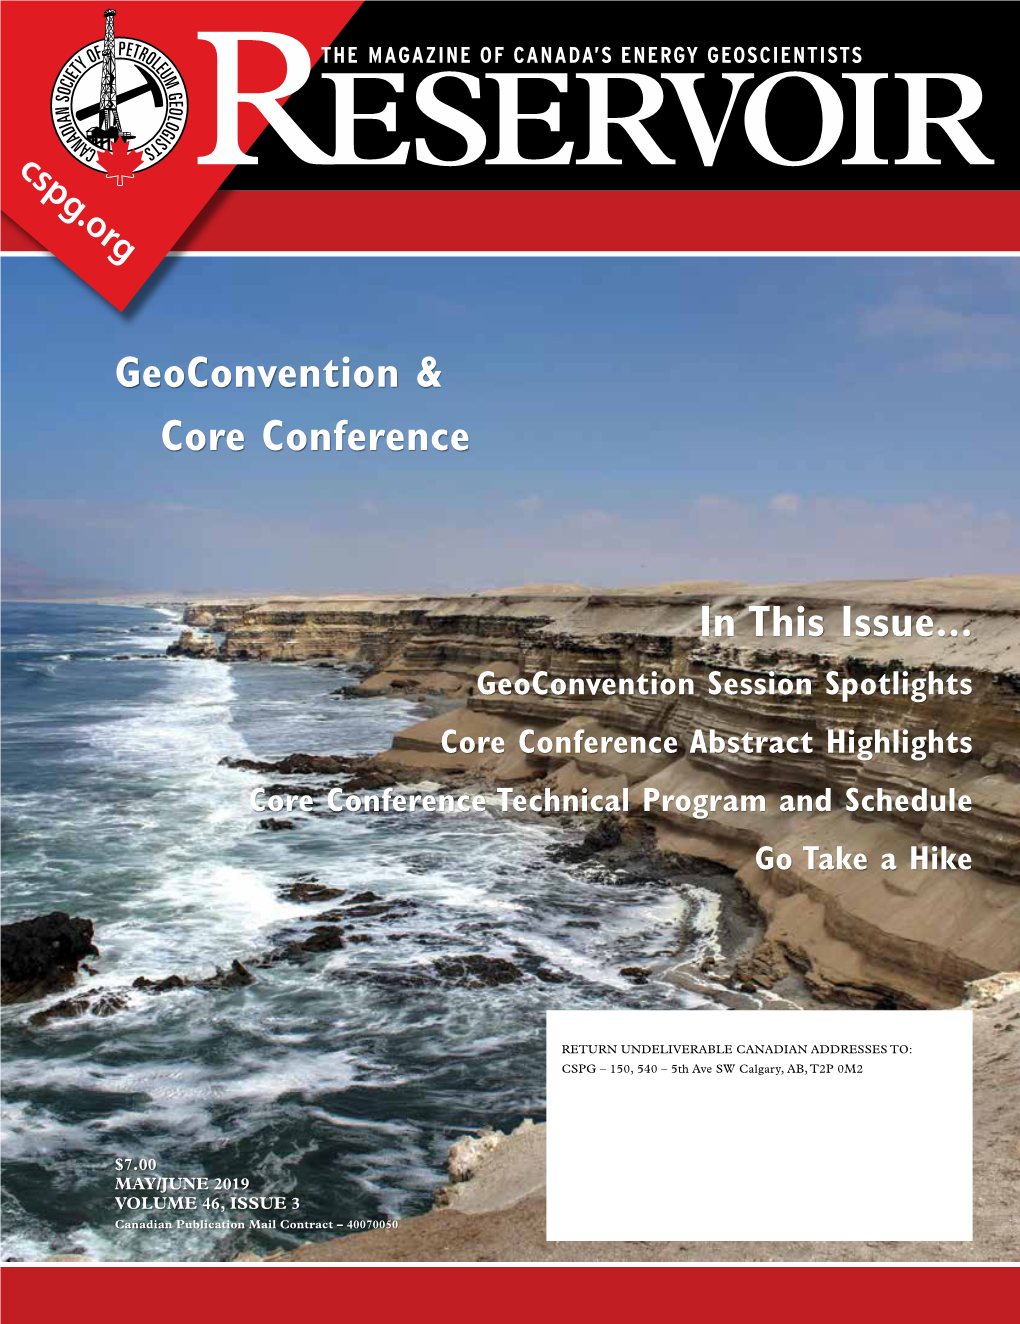 In This Issue... Geoconvention & Core Conference